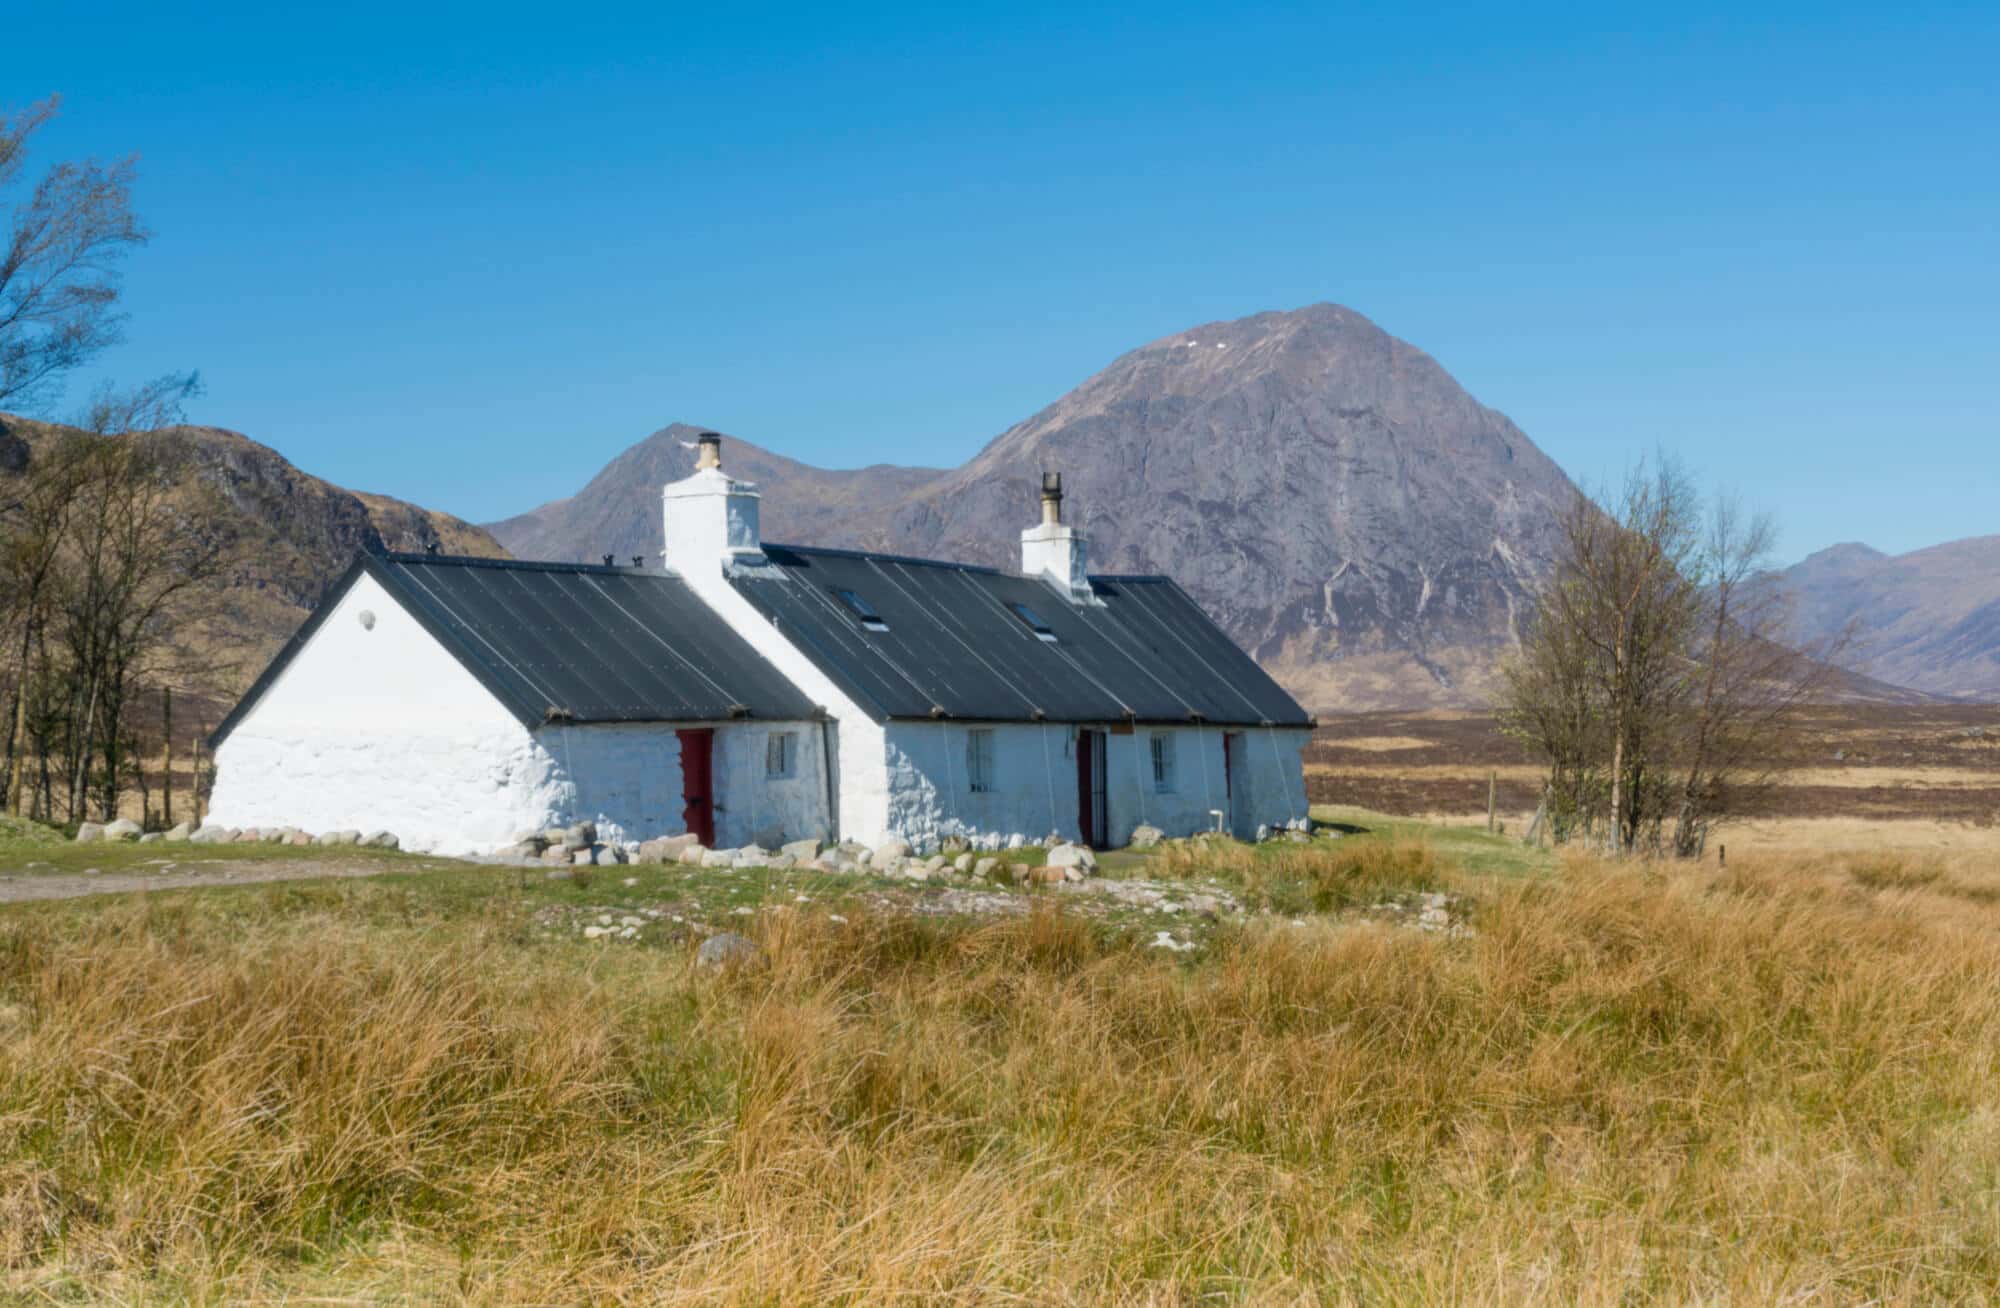 Blackrock Cottage, situated on the access road to the Glencoe mountain ski area with Buachaille Etive Mor seen beyond